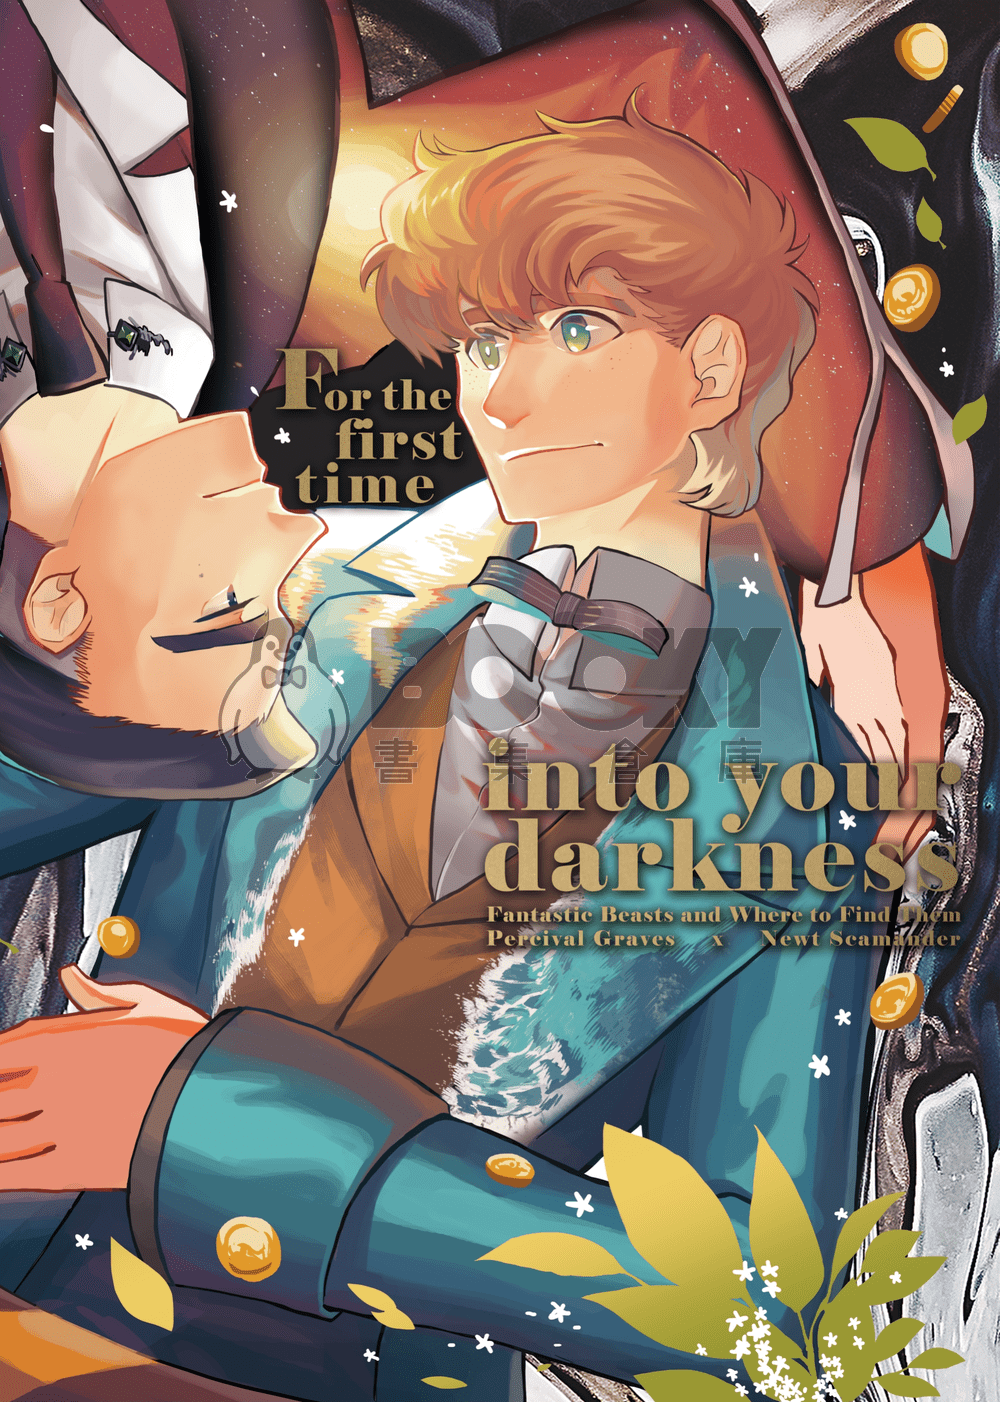 For the first time into your darkness 試閱圖片